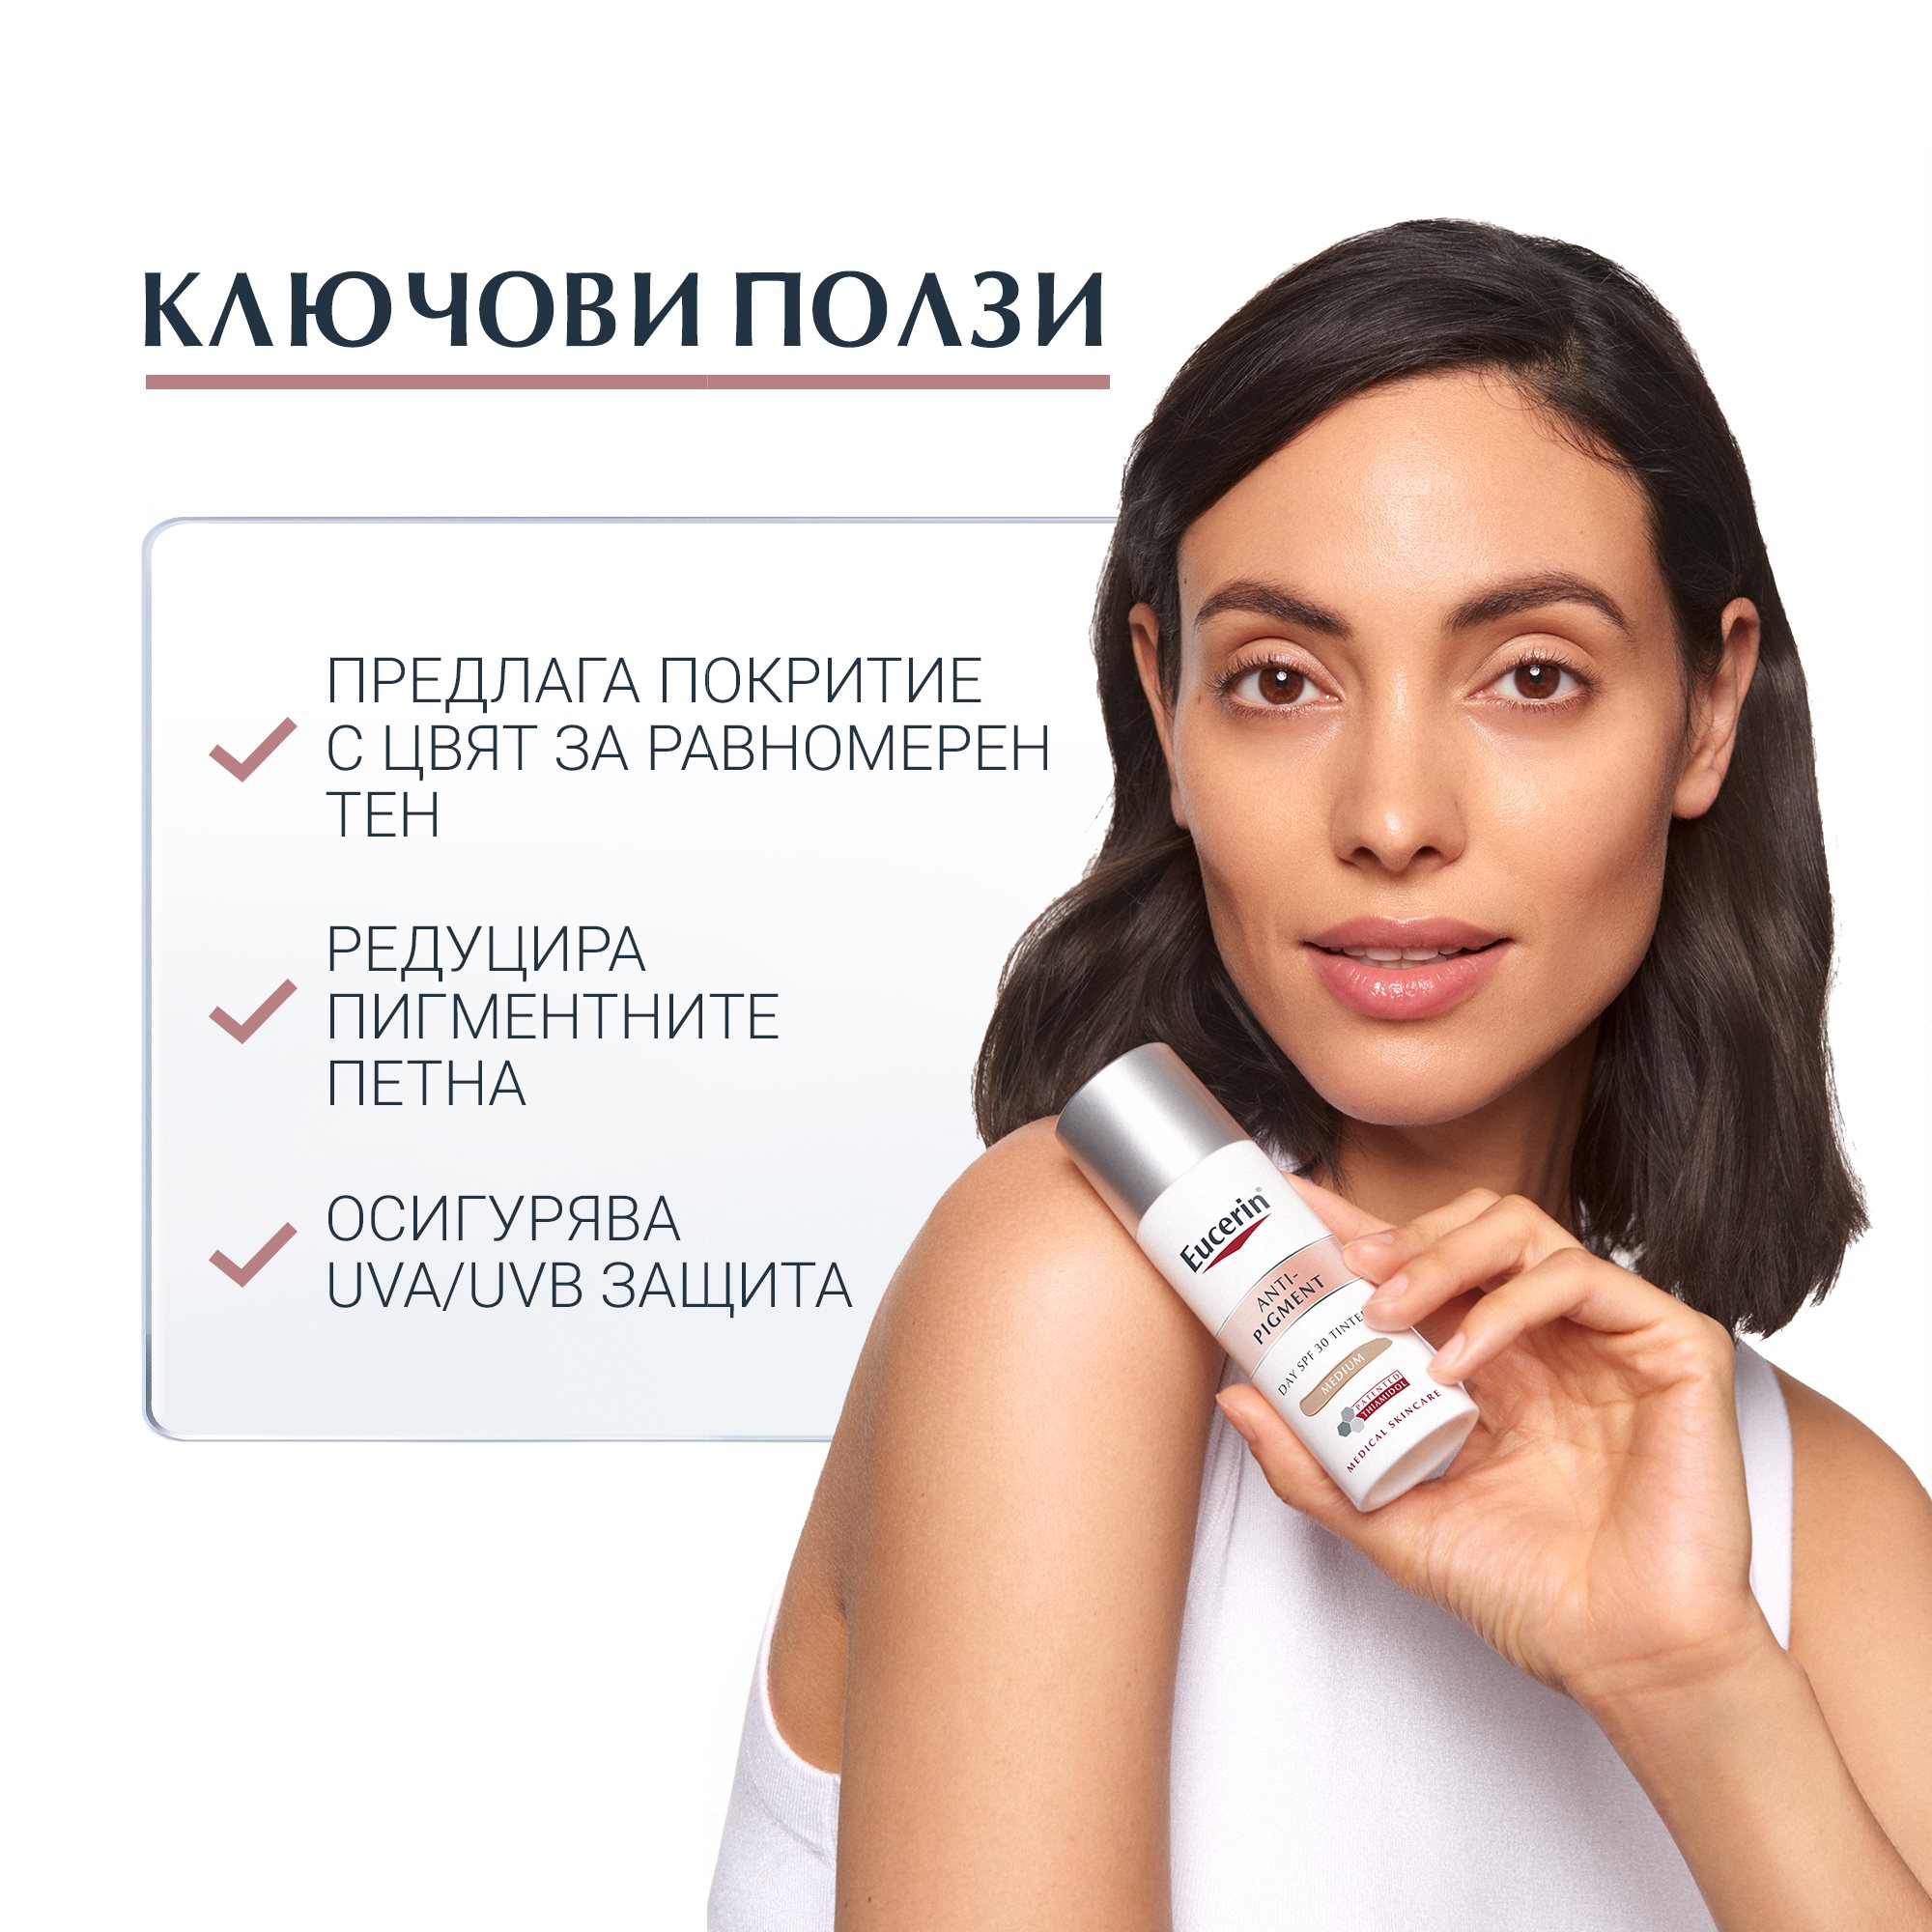 96% of women say Eucerin Anti-Pigment Day SPF 30 Tinted Medium “immediately evens out my skin.”